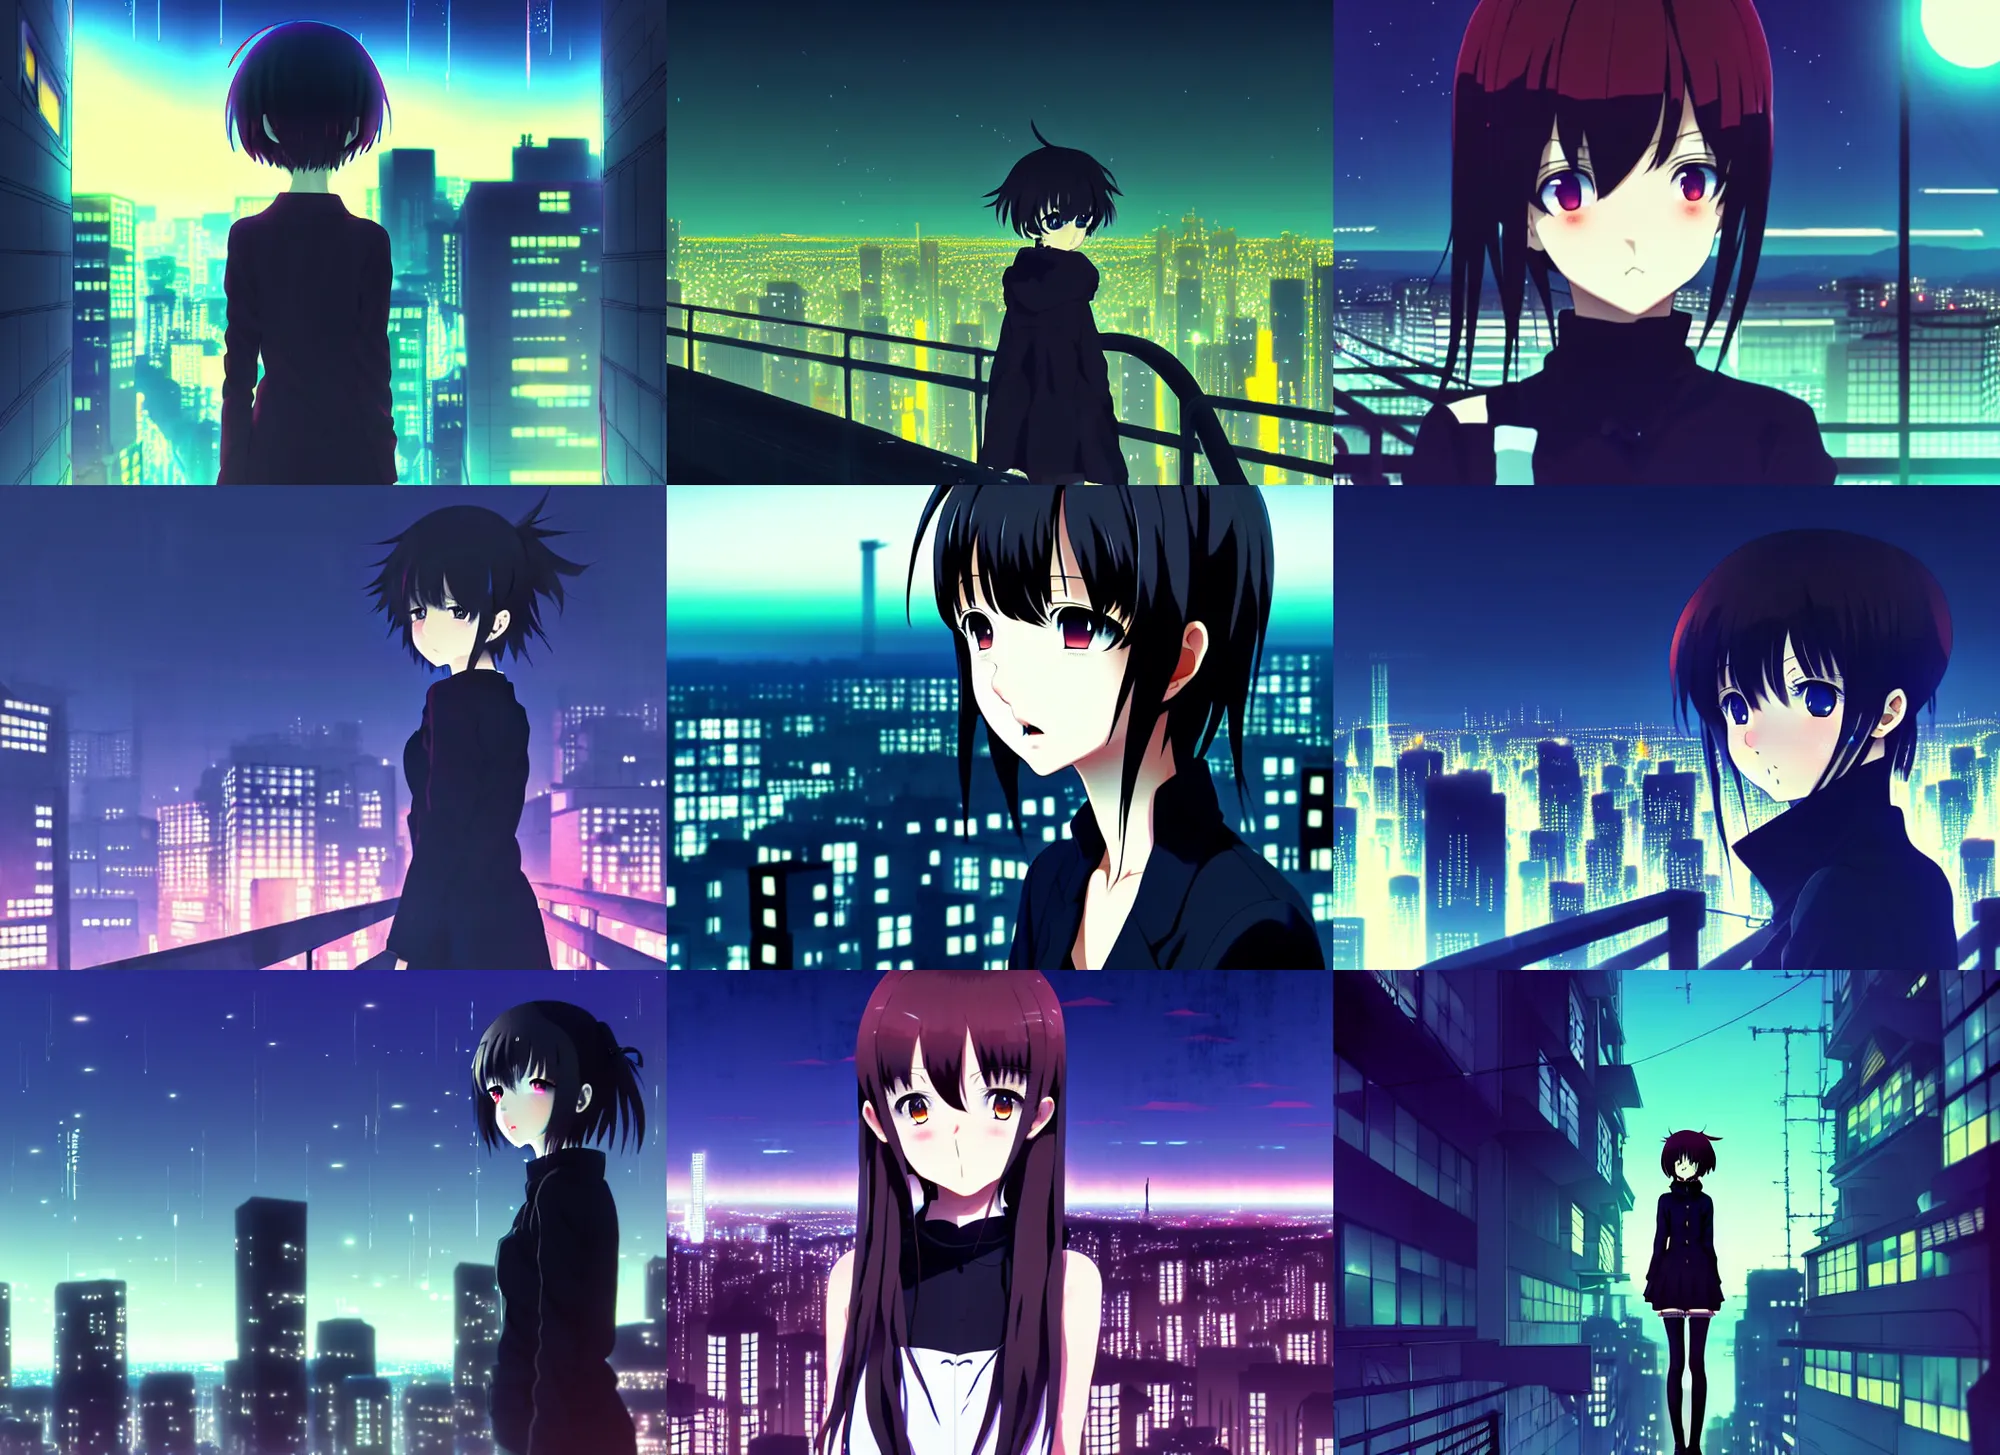 Prompt: anime frames, anime visual, dark portrait of a young female sightseeing above the city at night, guardrails, very low light, cute face by ilya kuvshinov and, psycho pass, kyoani, dynamic pose, dynamic perspective, strong silhouette, anime cels, rounded eyes, yoshinari yoh, dark tint